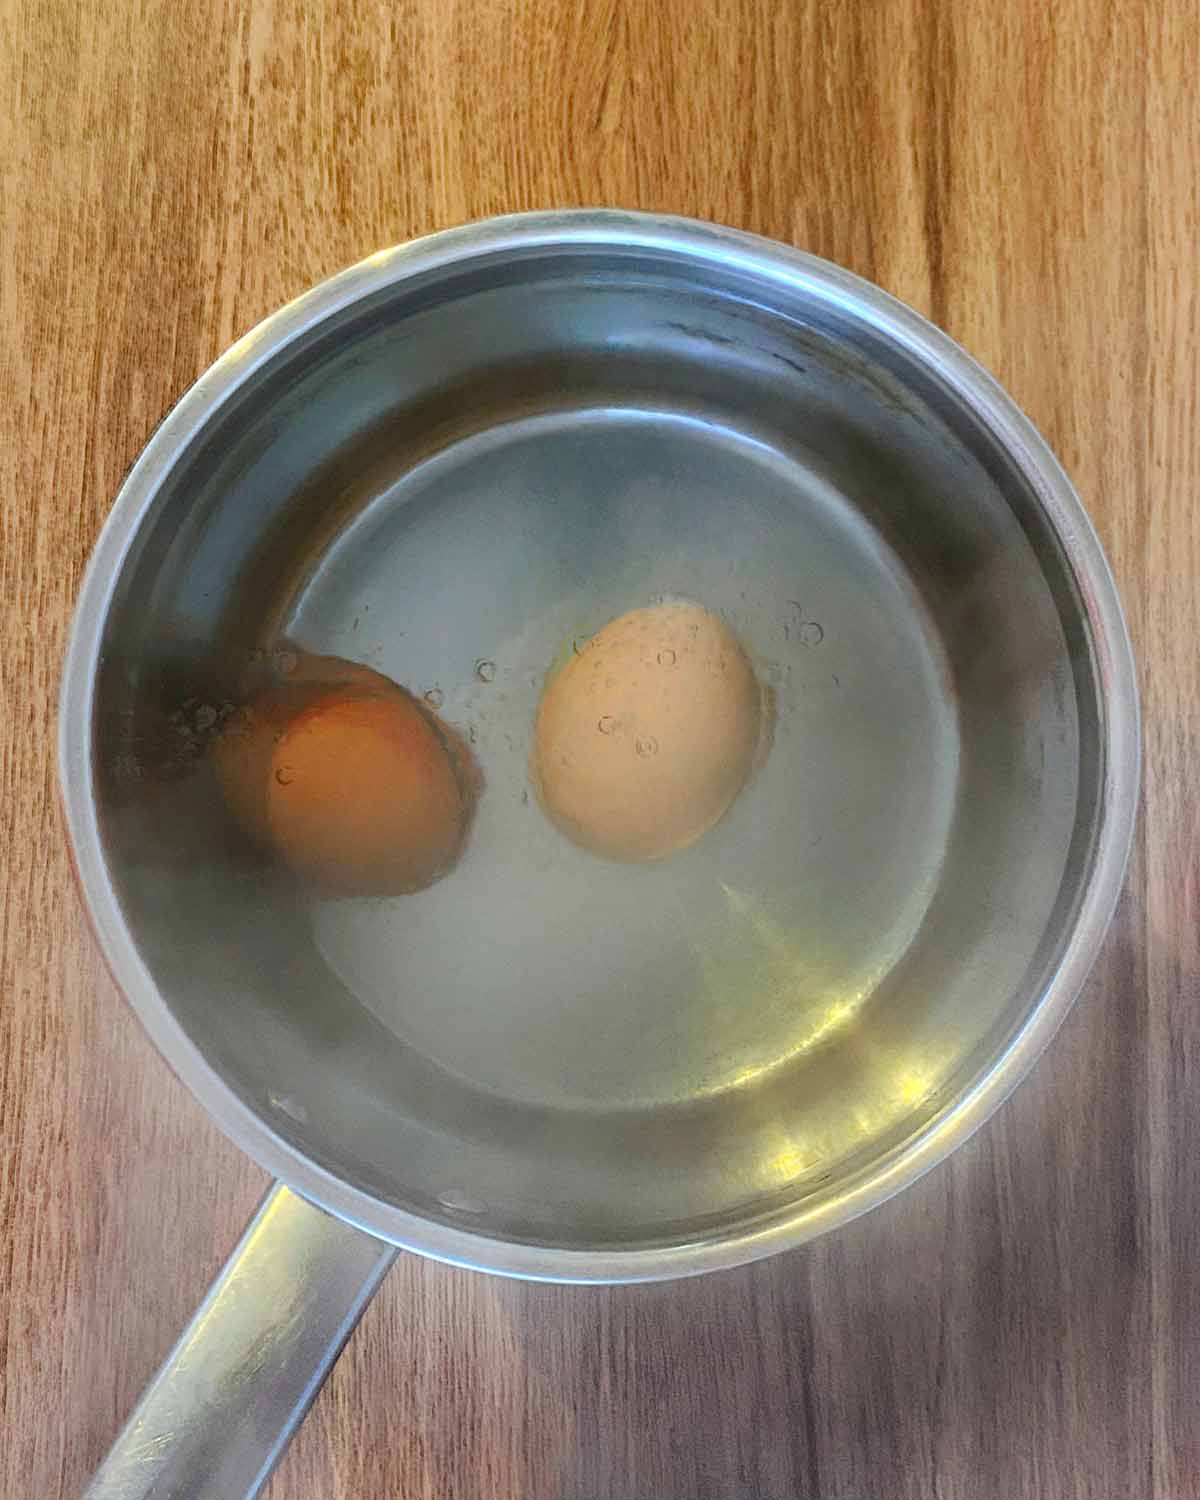 Two whole eggs in a pan of boiling water.